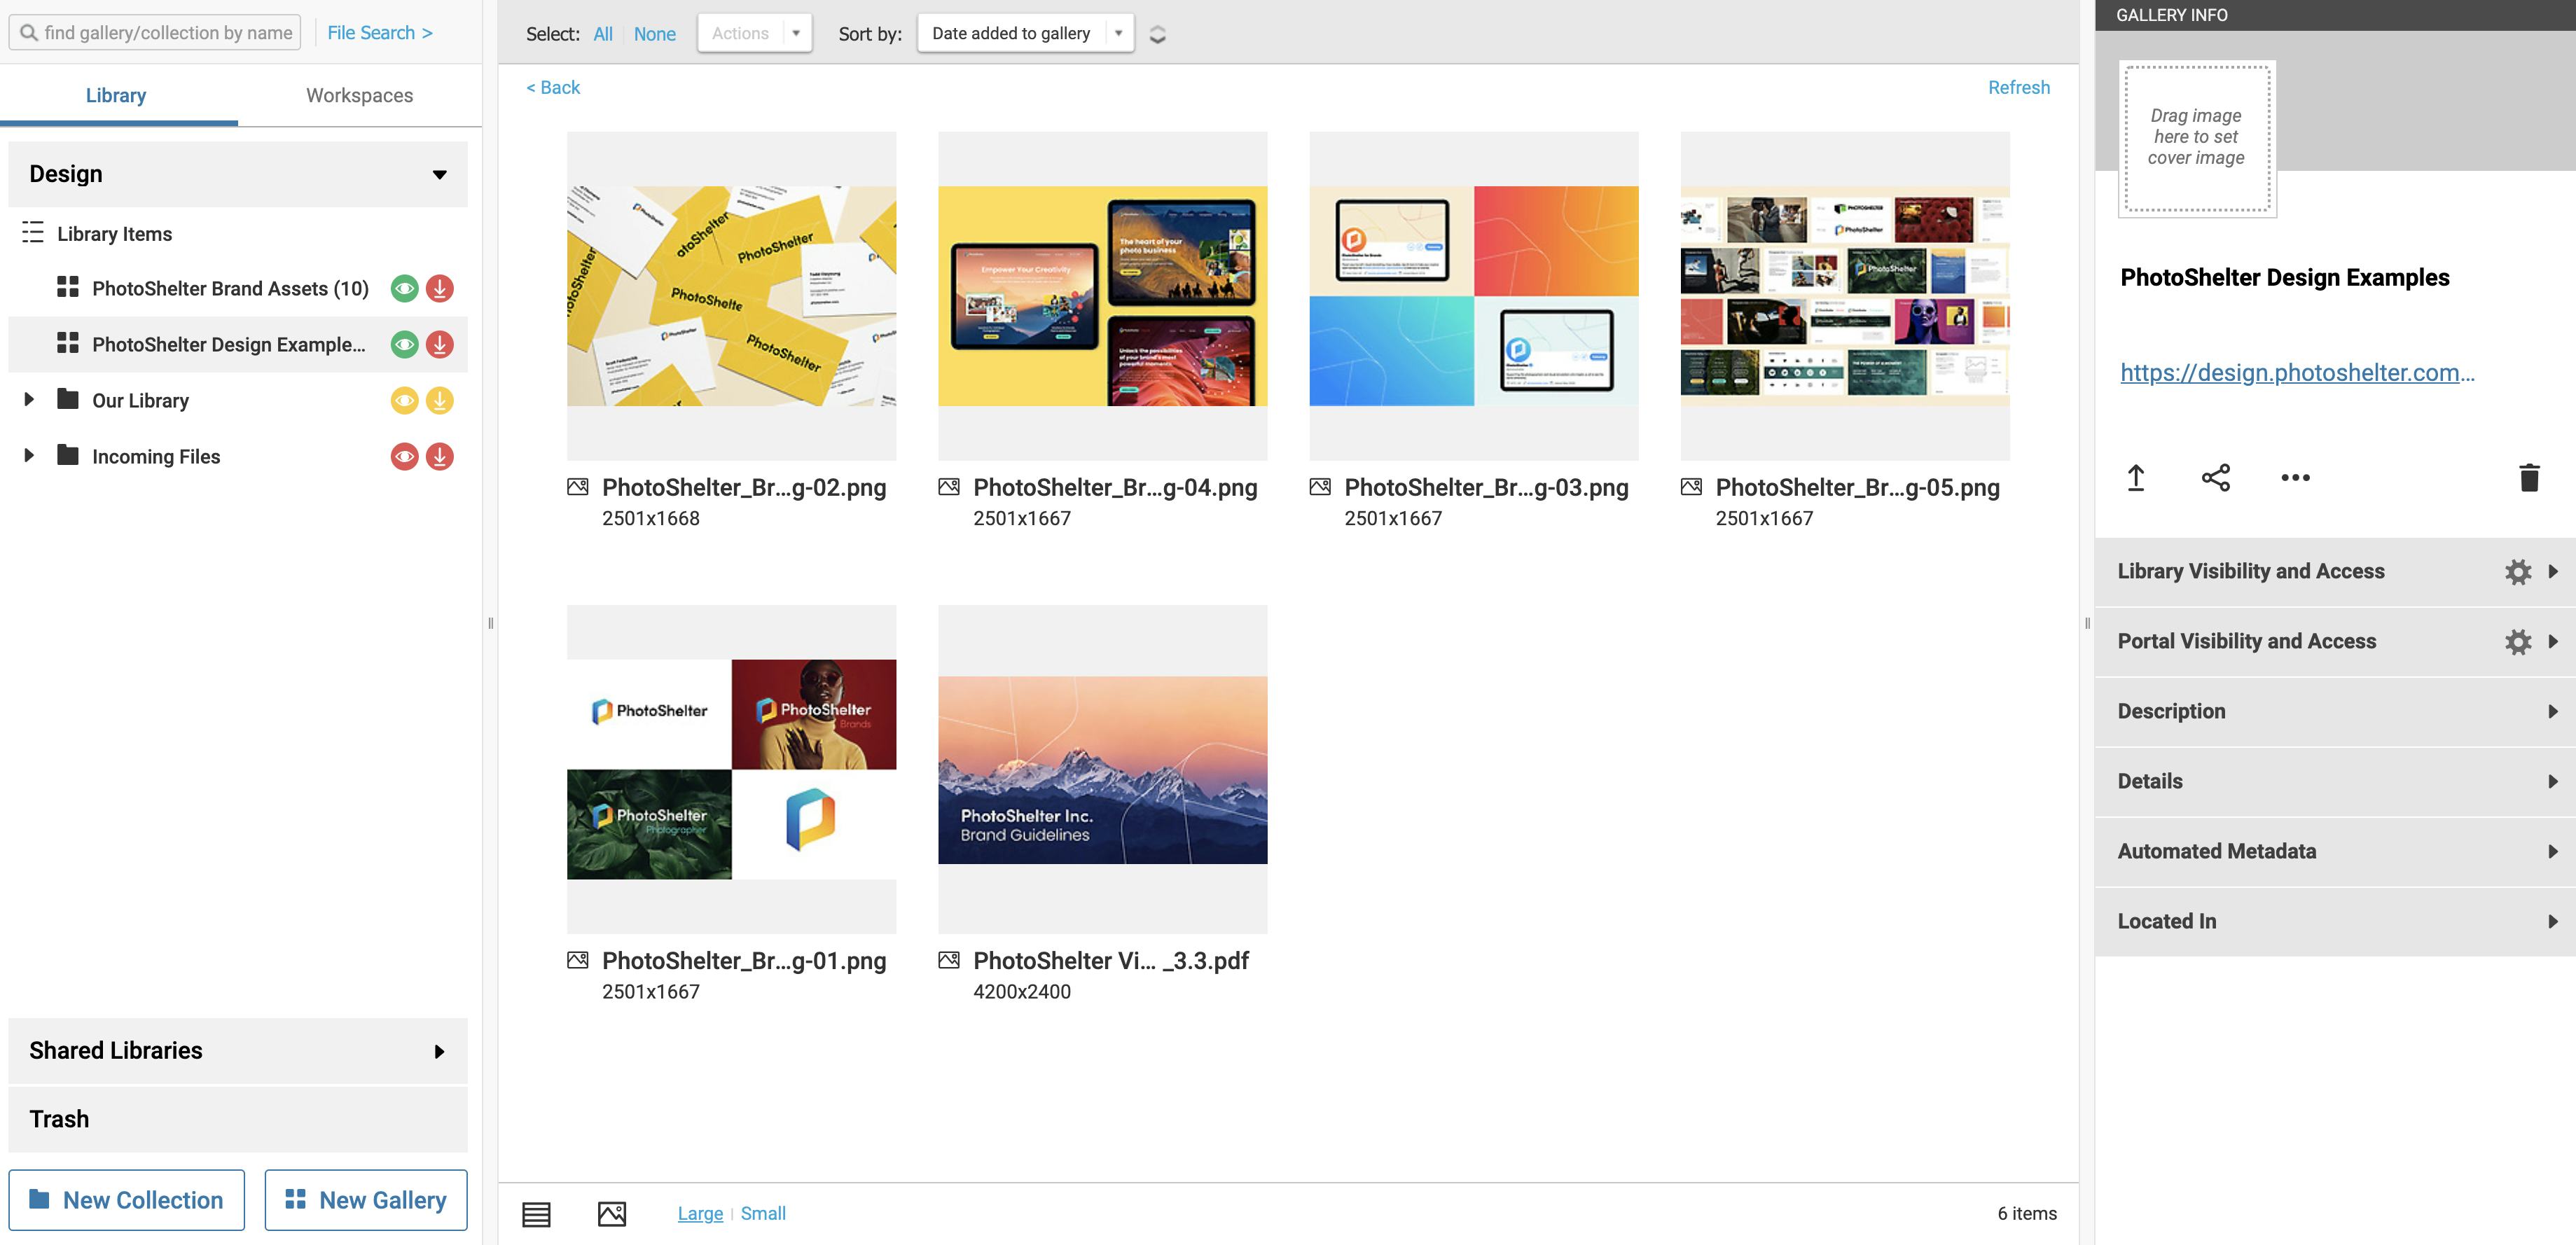 PhotoShelter for Brands Software - Member Library Overview